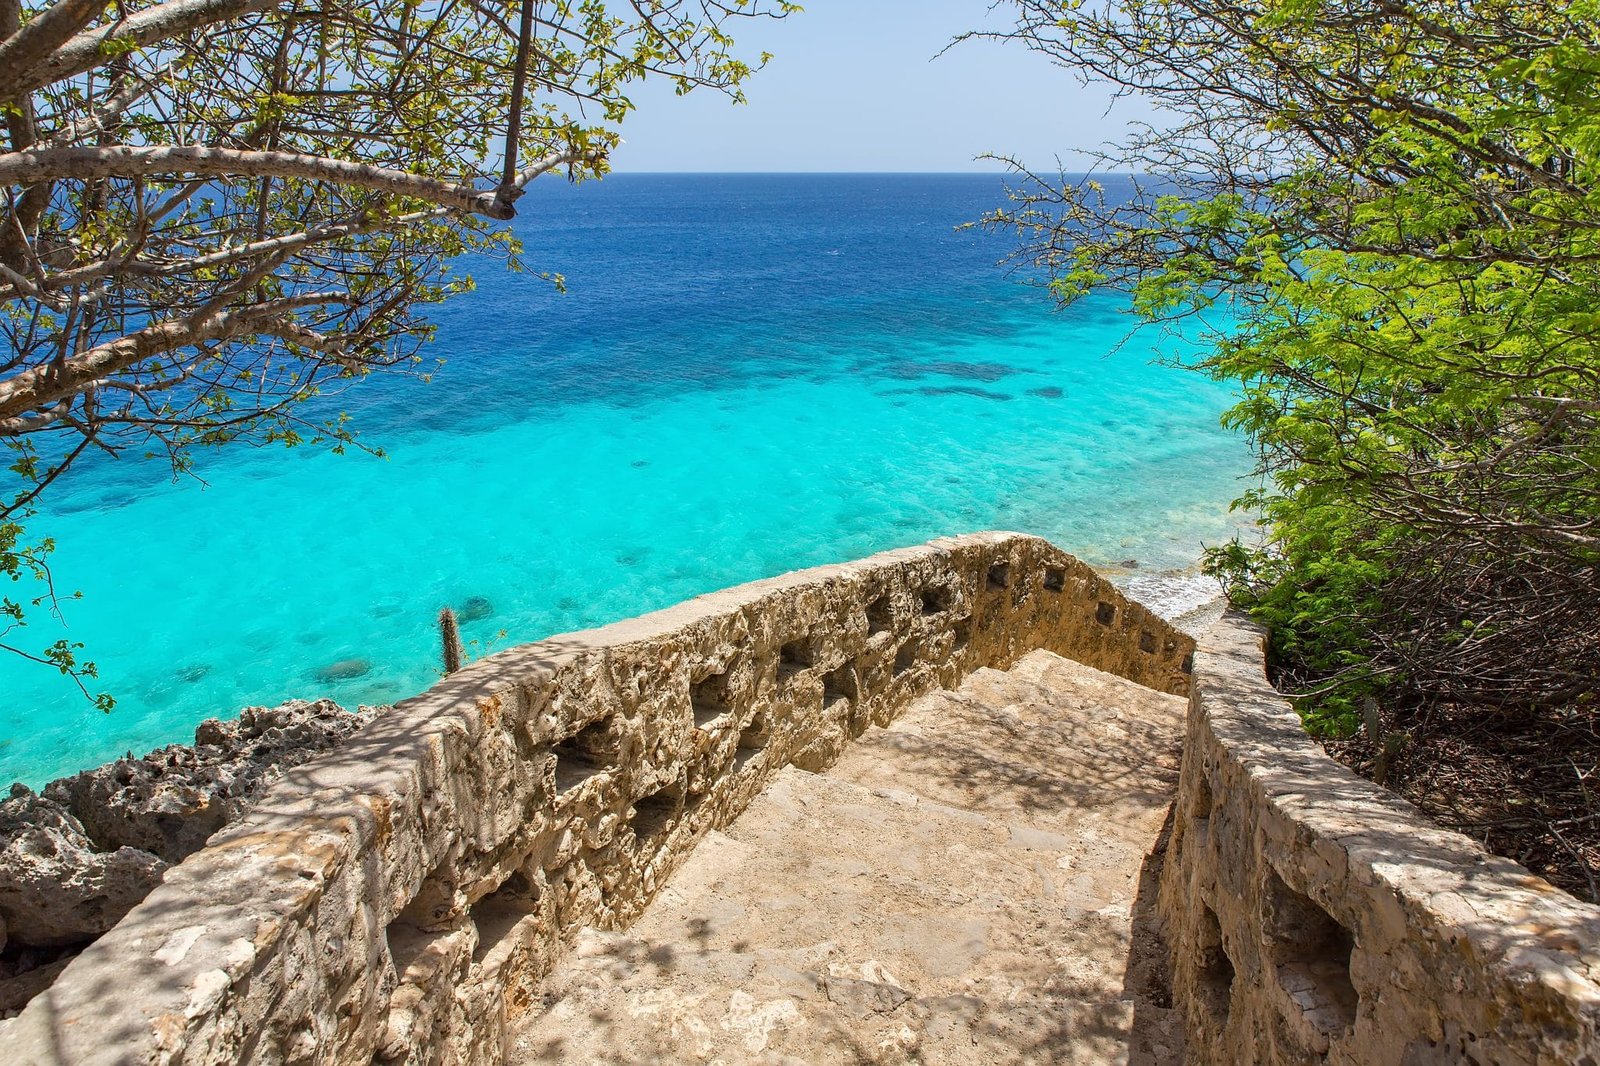 1000 steps descent to beach and blue sea on island Bonaire. This is a famous place for divers where you can see many tropical fishes and green turtles. The name has been choosen because for a diver carrying at about 30 kg as divers equipment along these steps feels like a 100 steps!